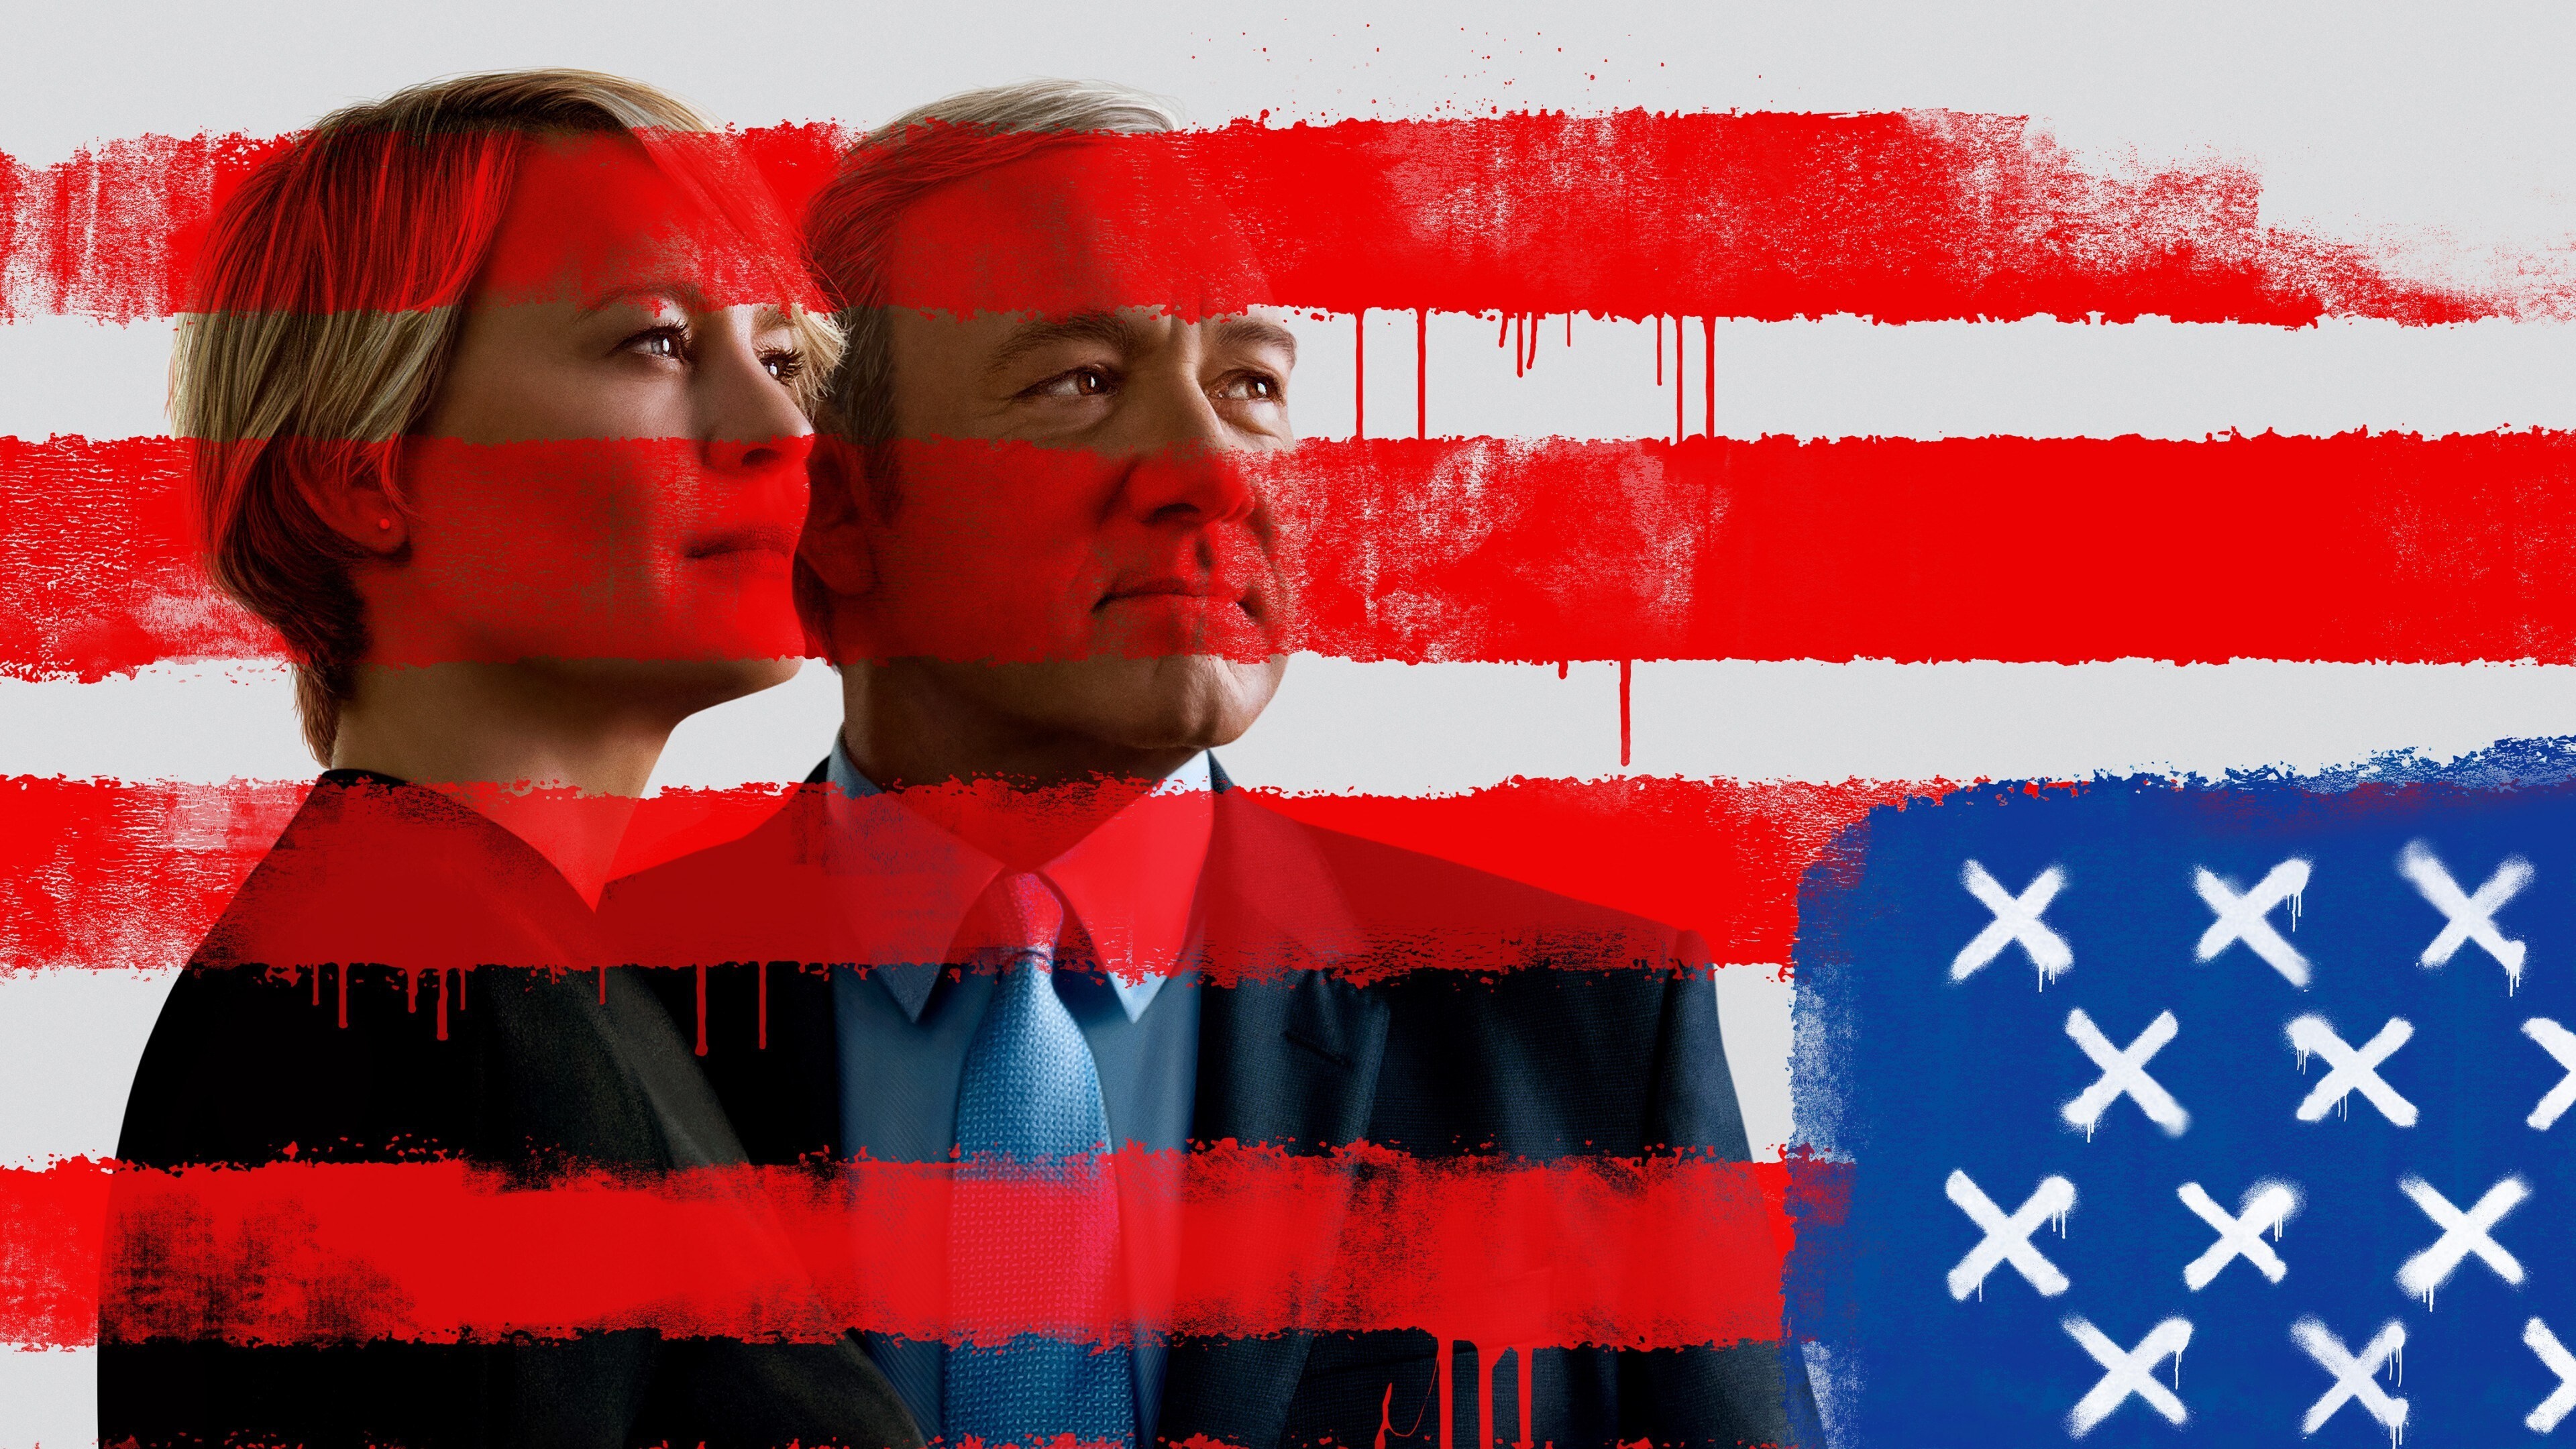 House of Cards: American TV series, Drama, USA, Kevin Spacey, Claire Underwood, Robin Wright. 3840x2160 4K Background.